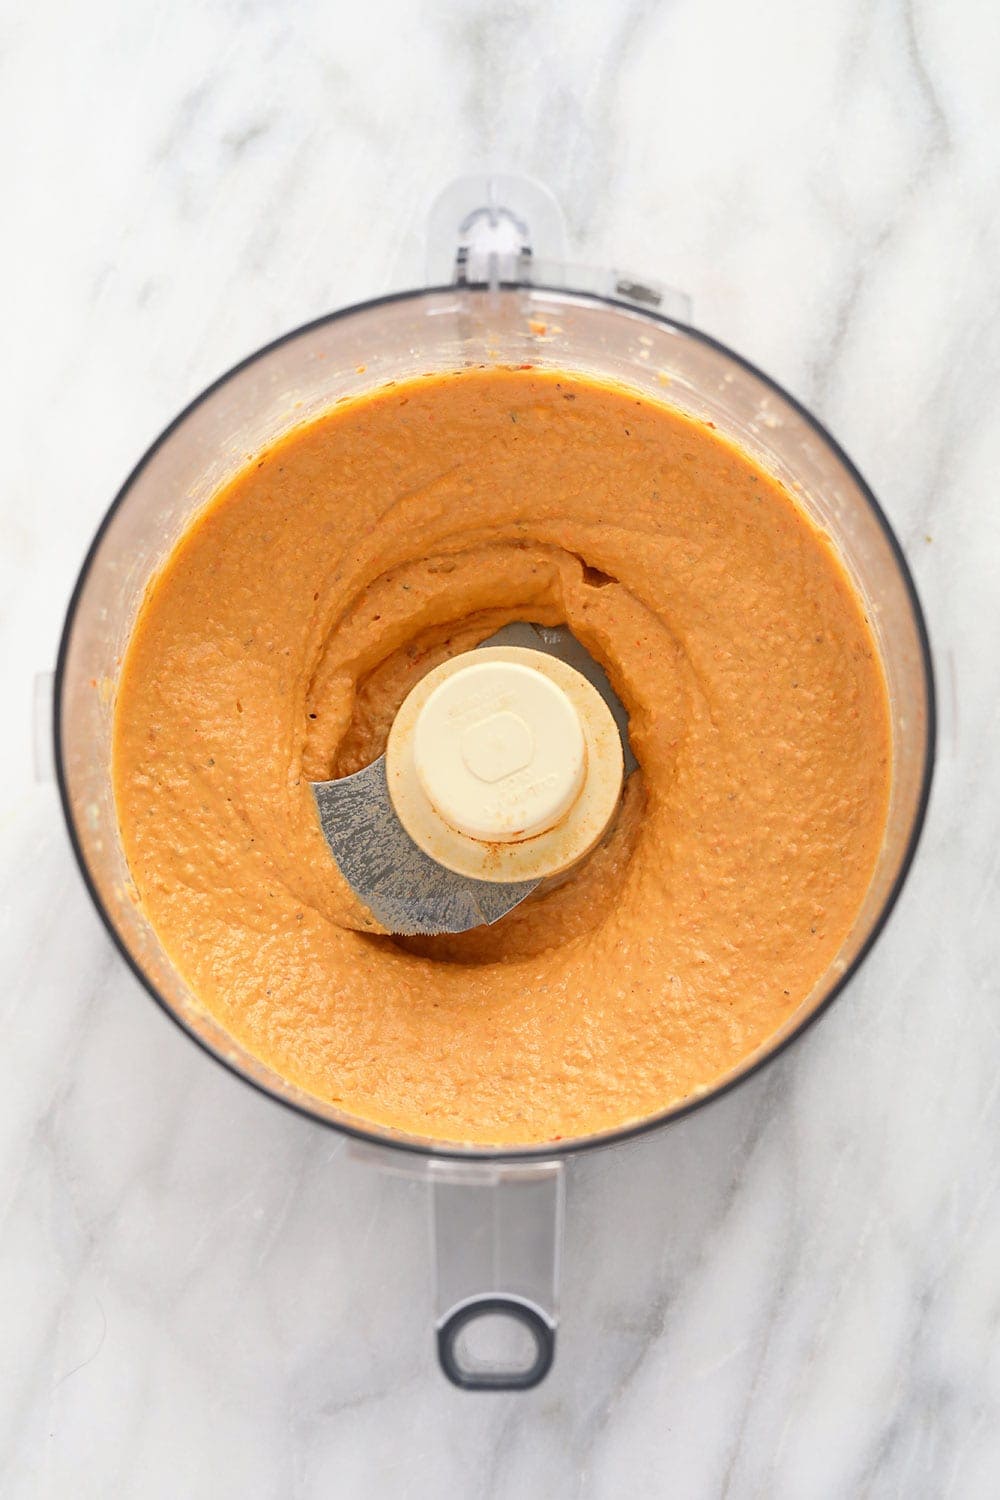 roasted red pepper hummus blended to perfection in a food processor